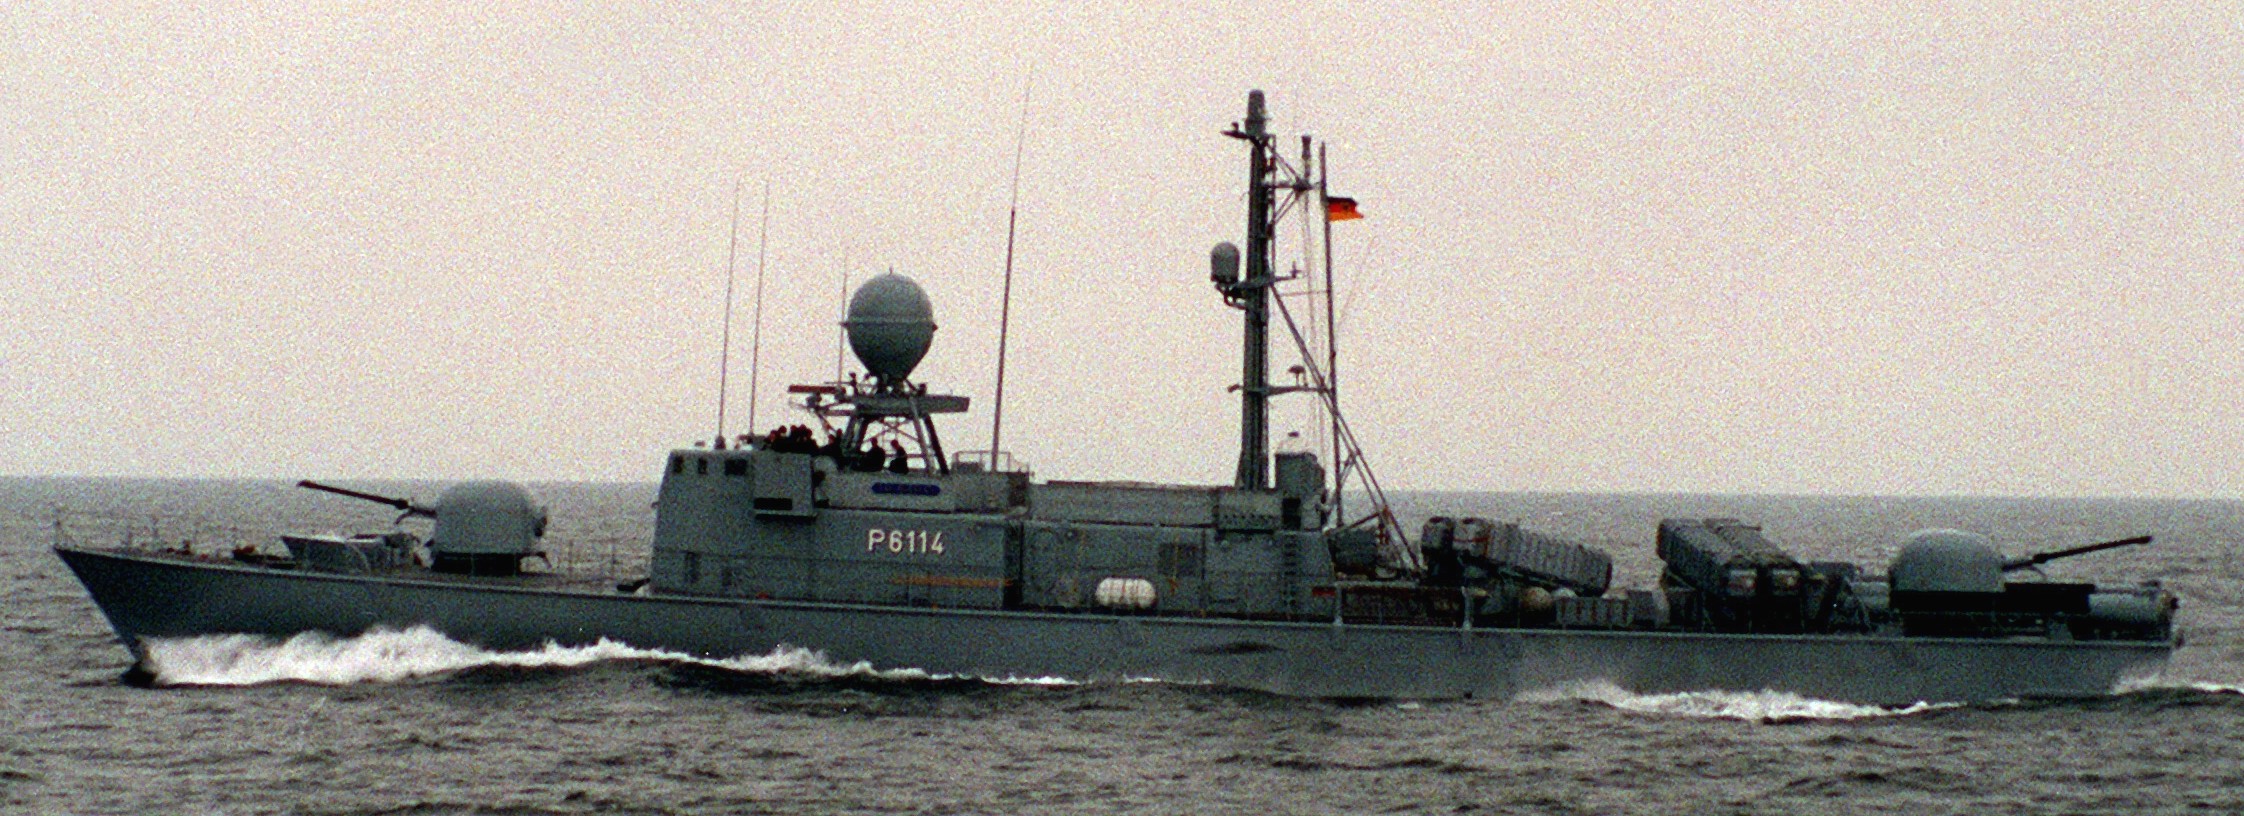 p6114 s64 fgs bussard type 143 albatros class fast attack missile craft boat german navy 02